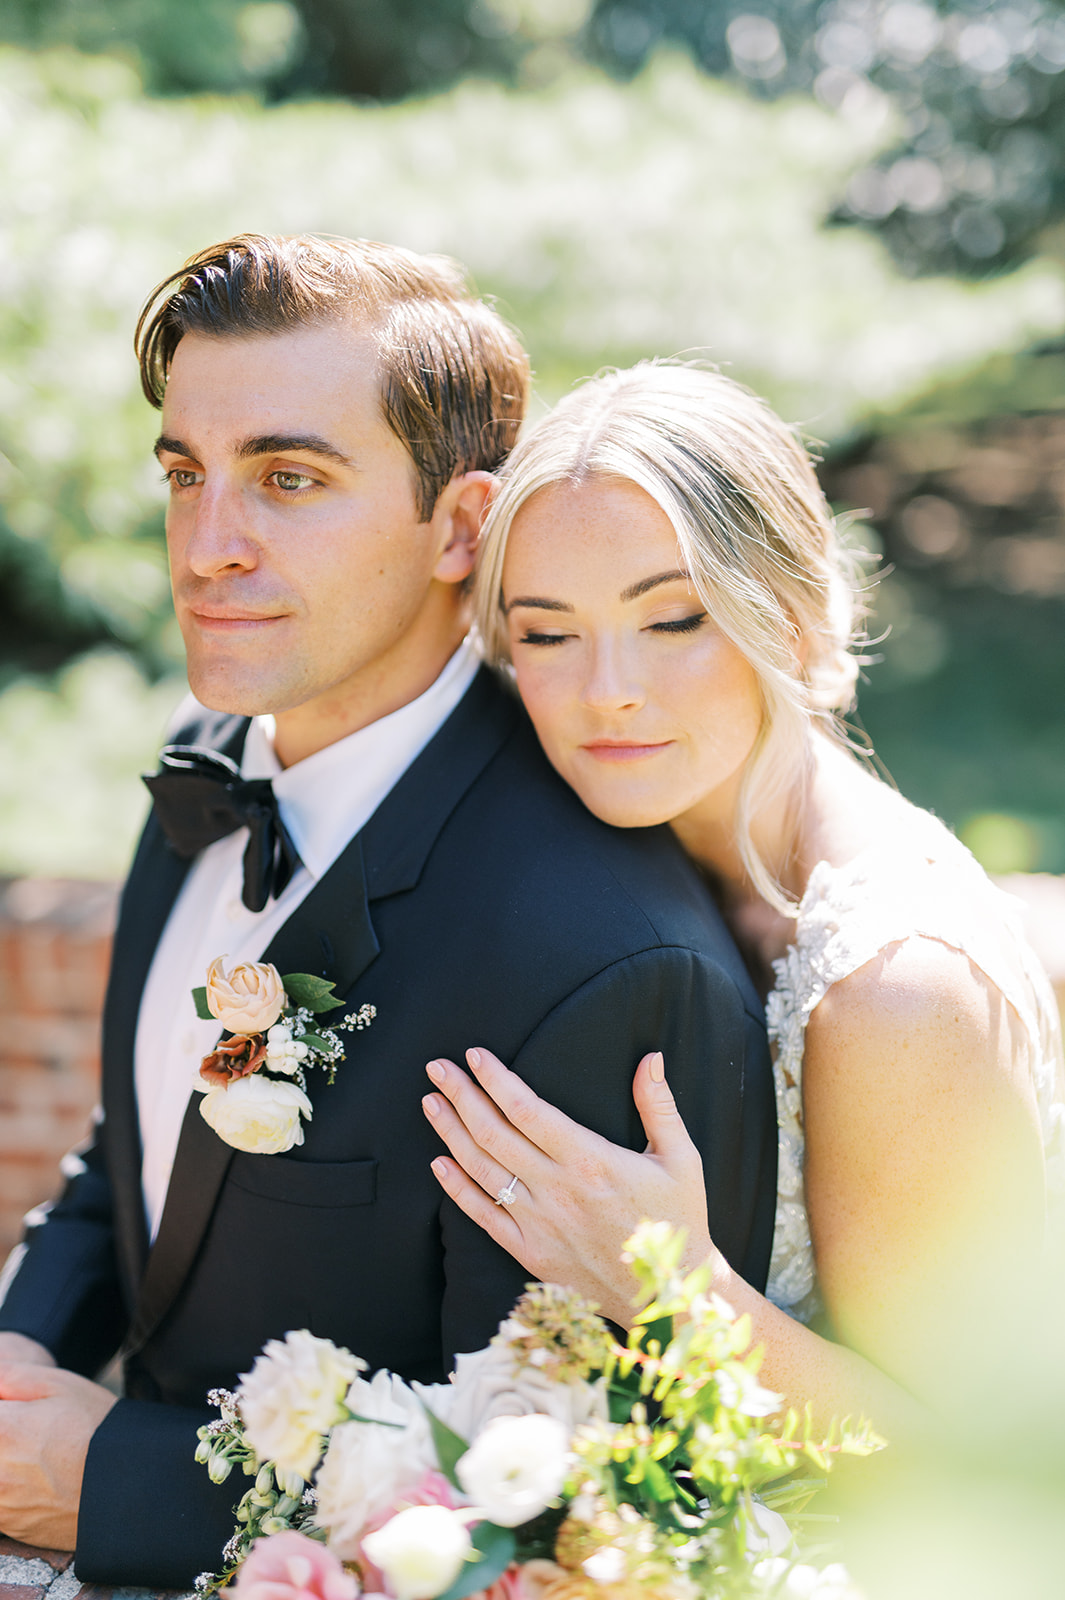 romantic portrait of bride and groom embracing in dreamy sunlight